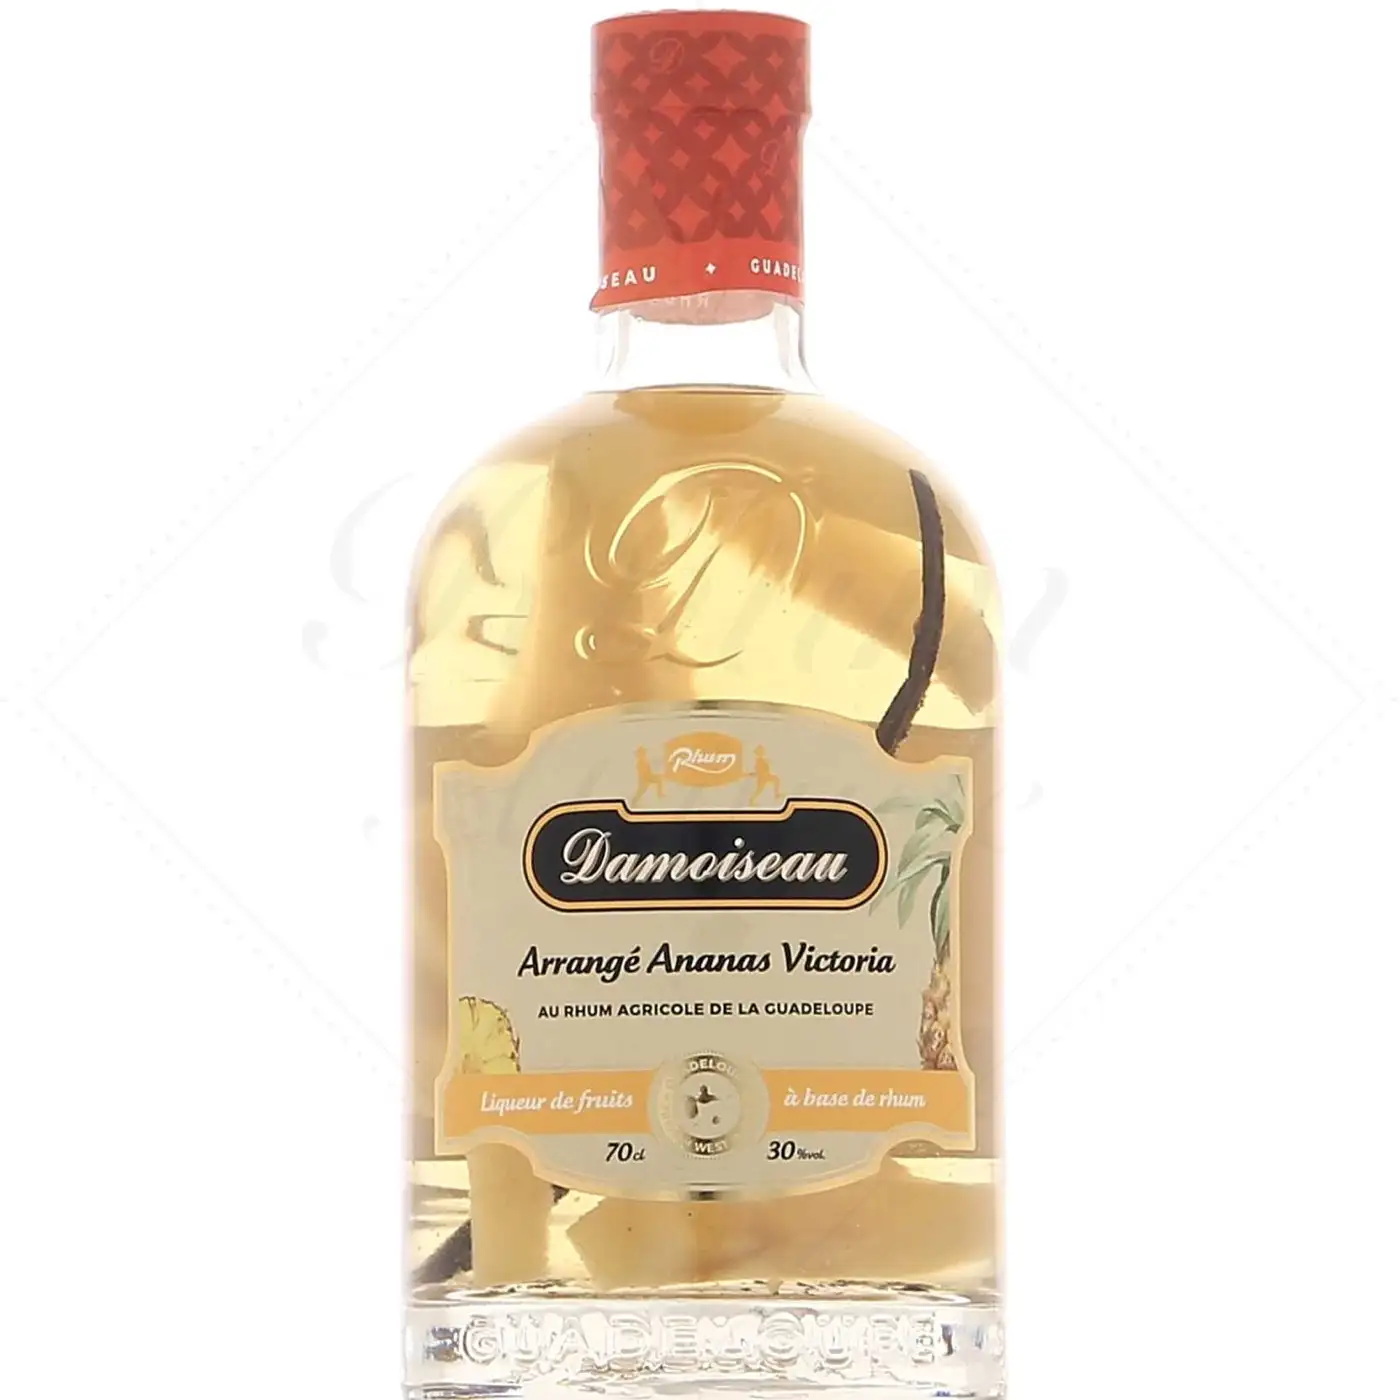 Image of the front of the bottle of the rum Les Arrangés Ananas Victoria